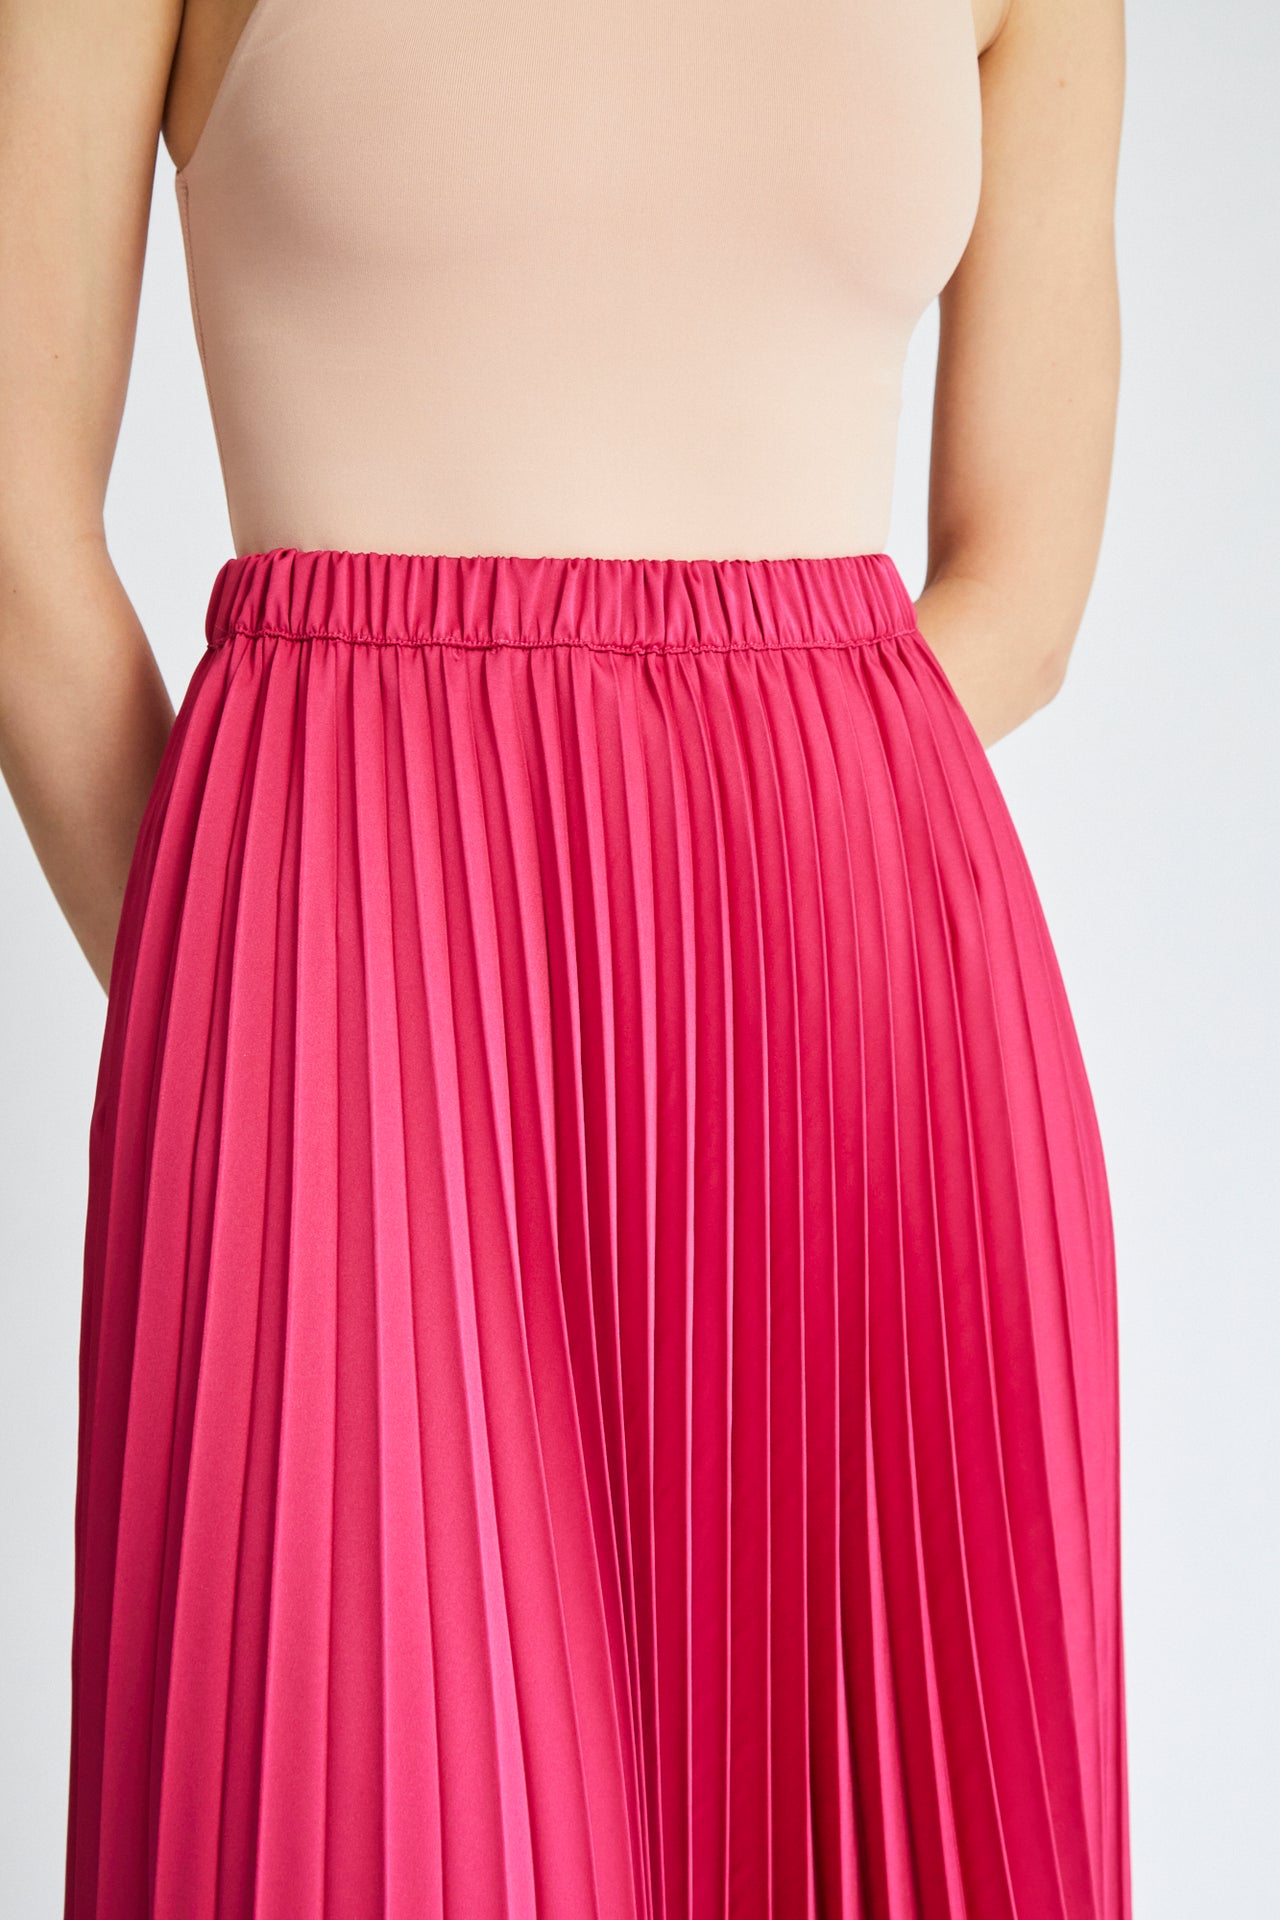 CO|TE FLORA PLEATED SKIRT- 2 COLORS